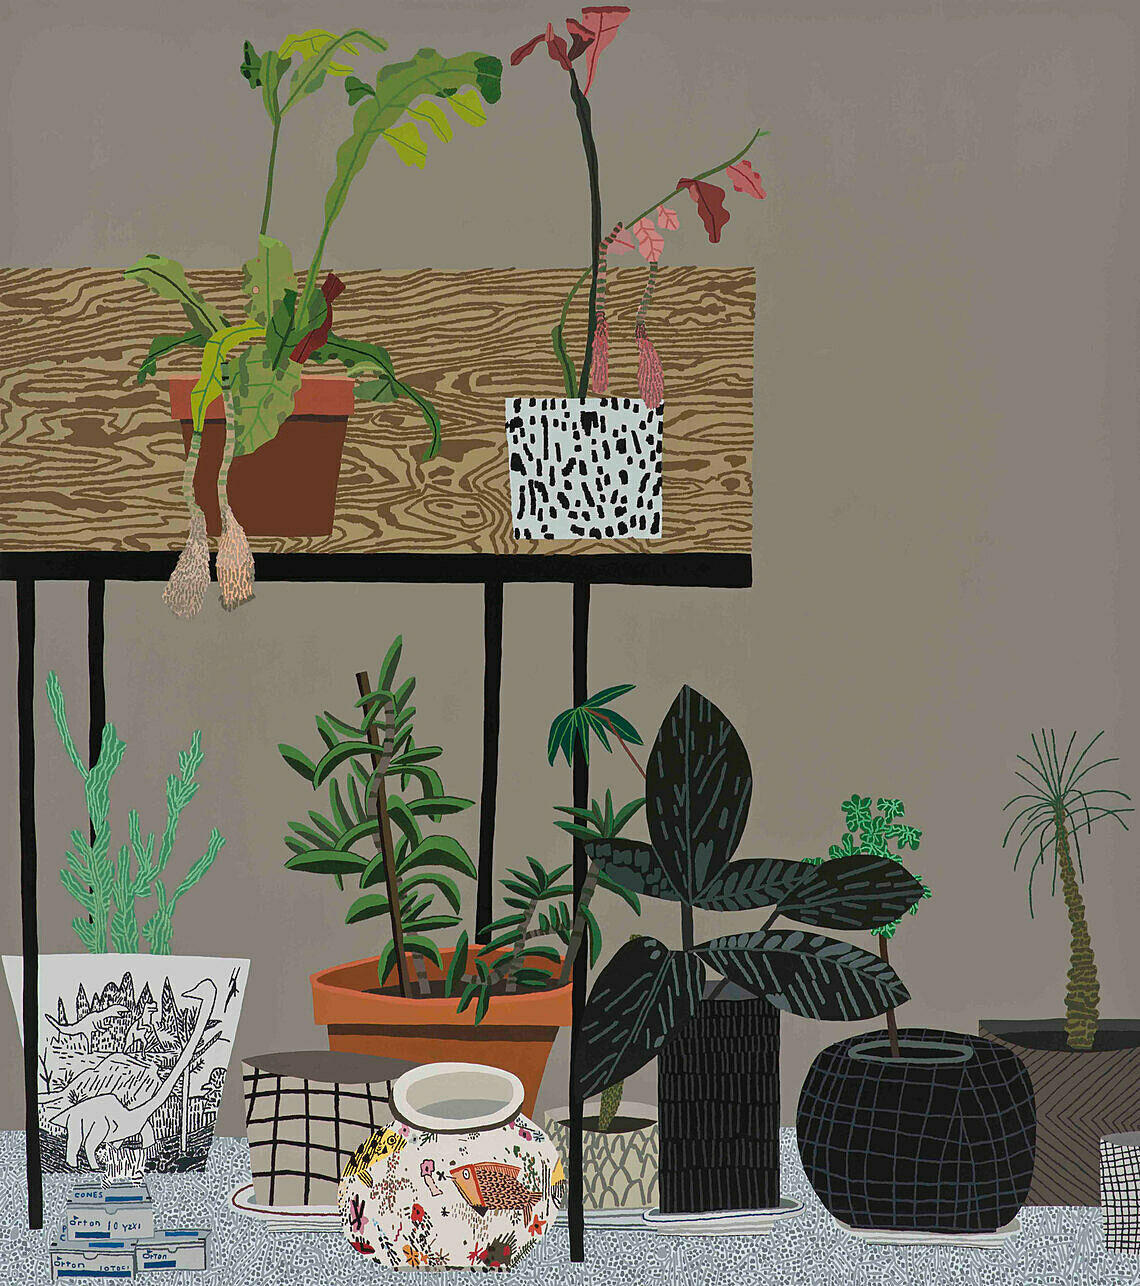 Painting of various potted plants on and below a wooden table, with a dinosaur drawing and a floral-patterned vase in the foreground.